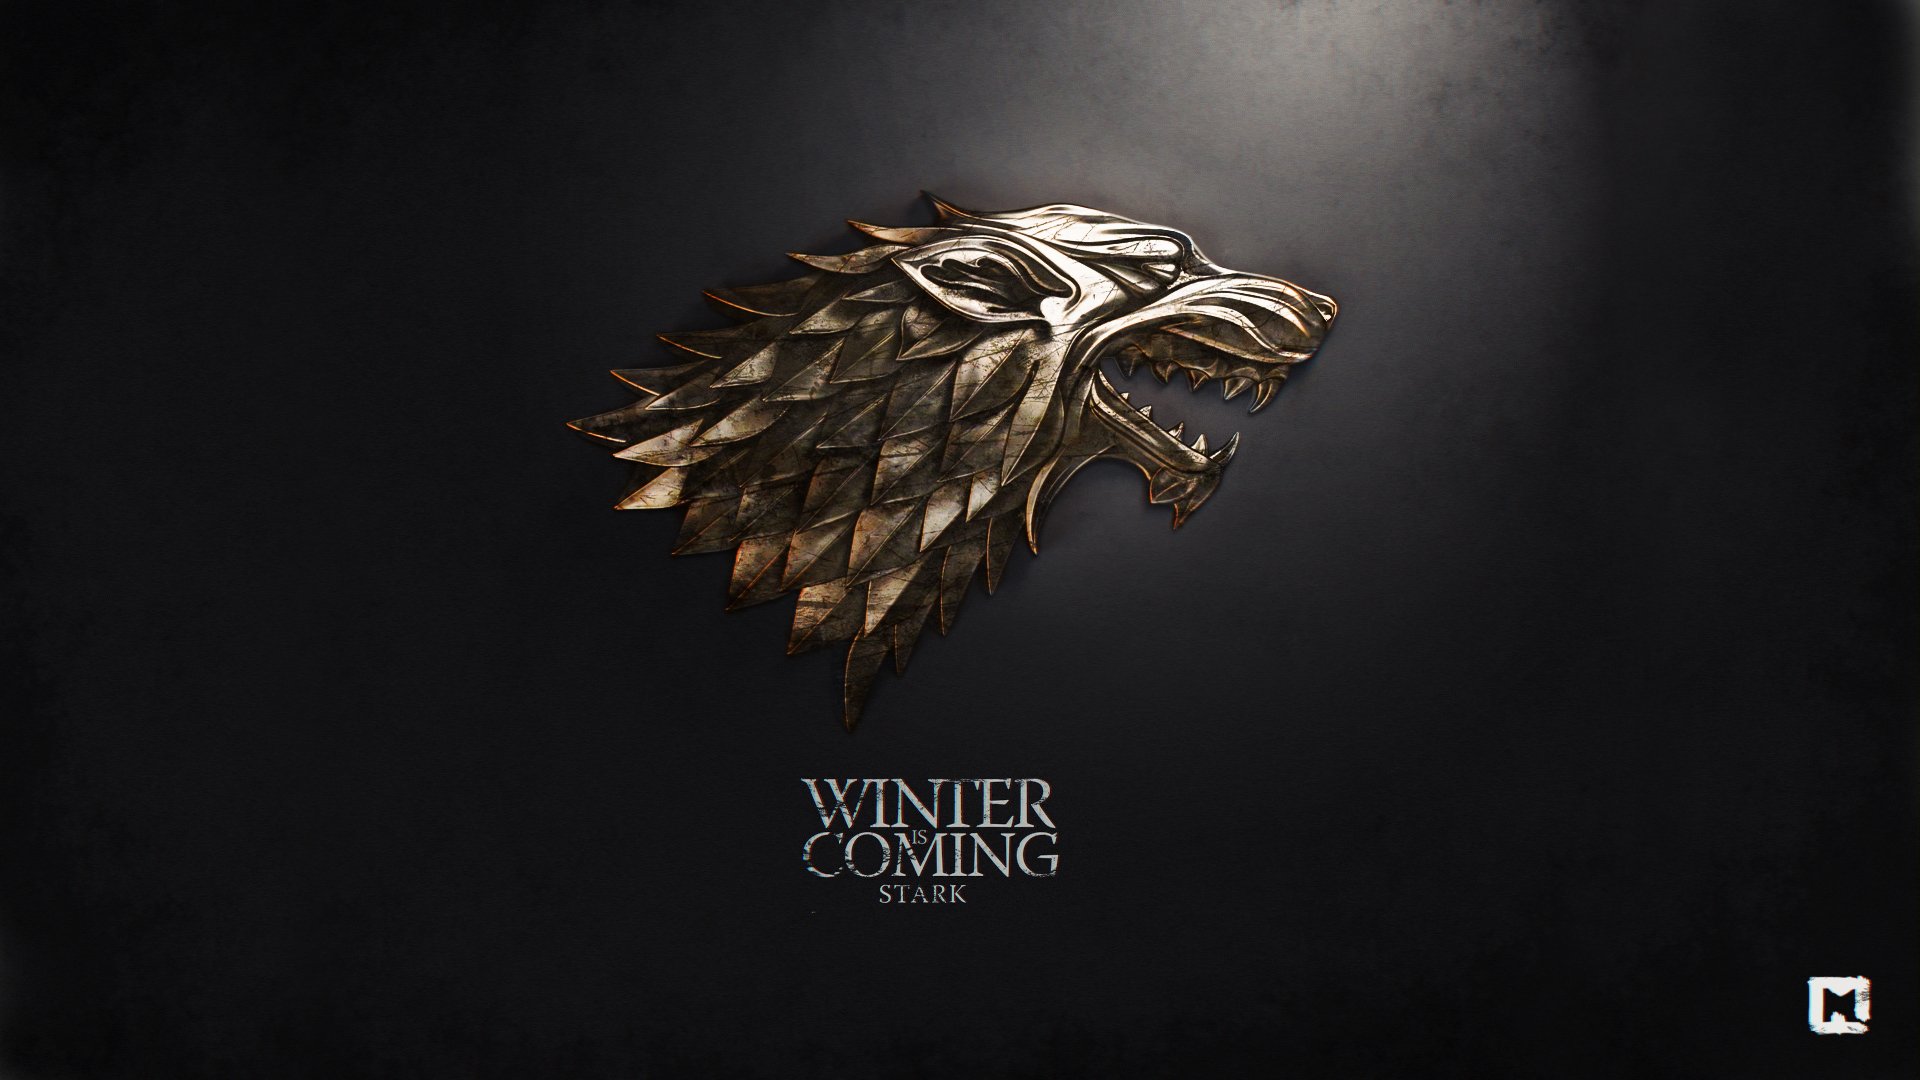 game, Of, Thrones Wallpaper